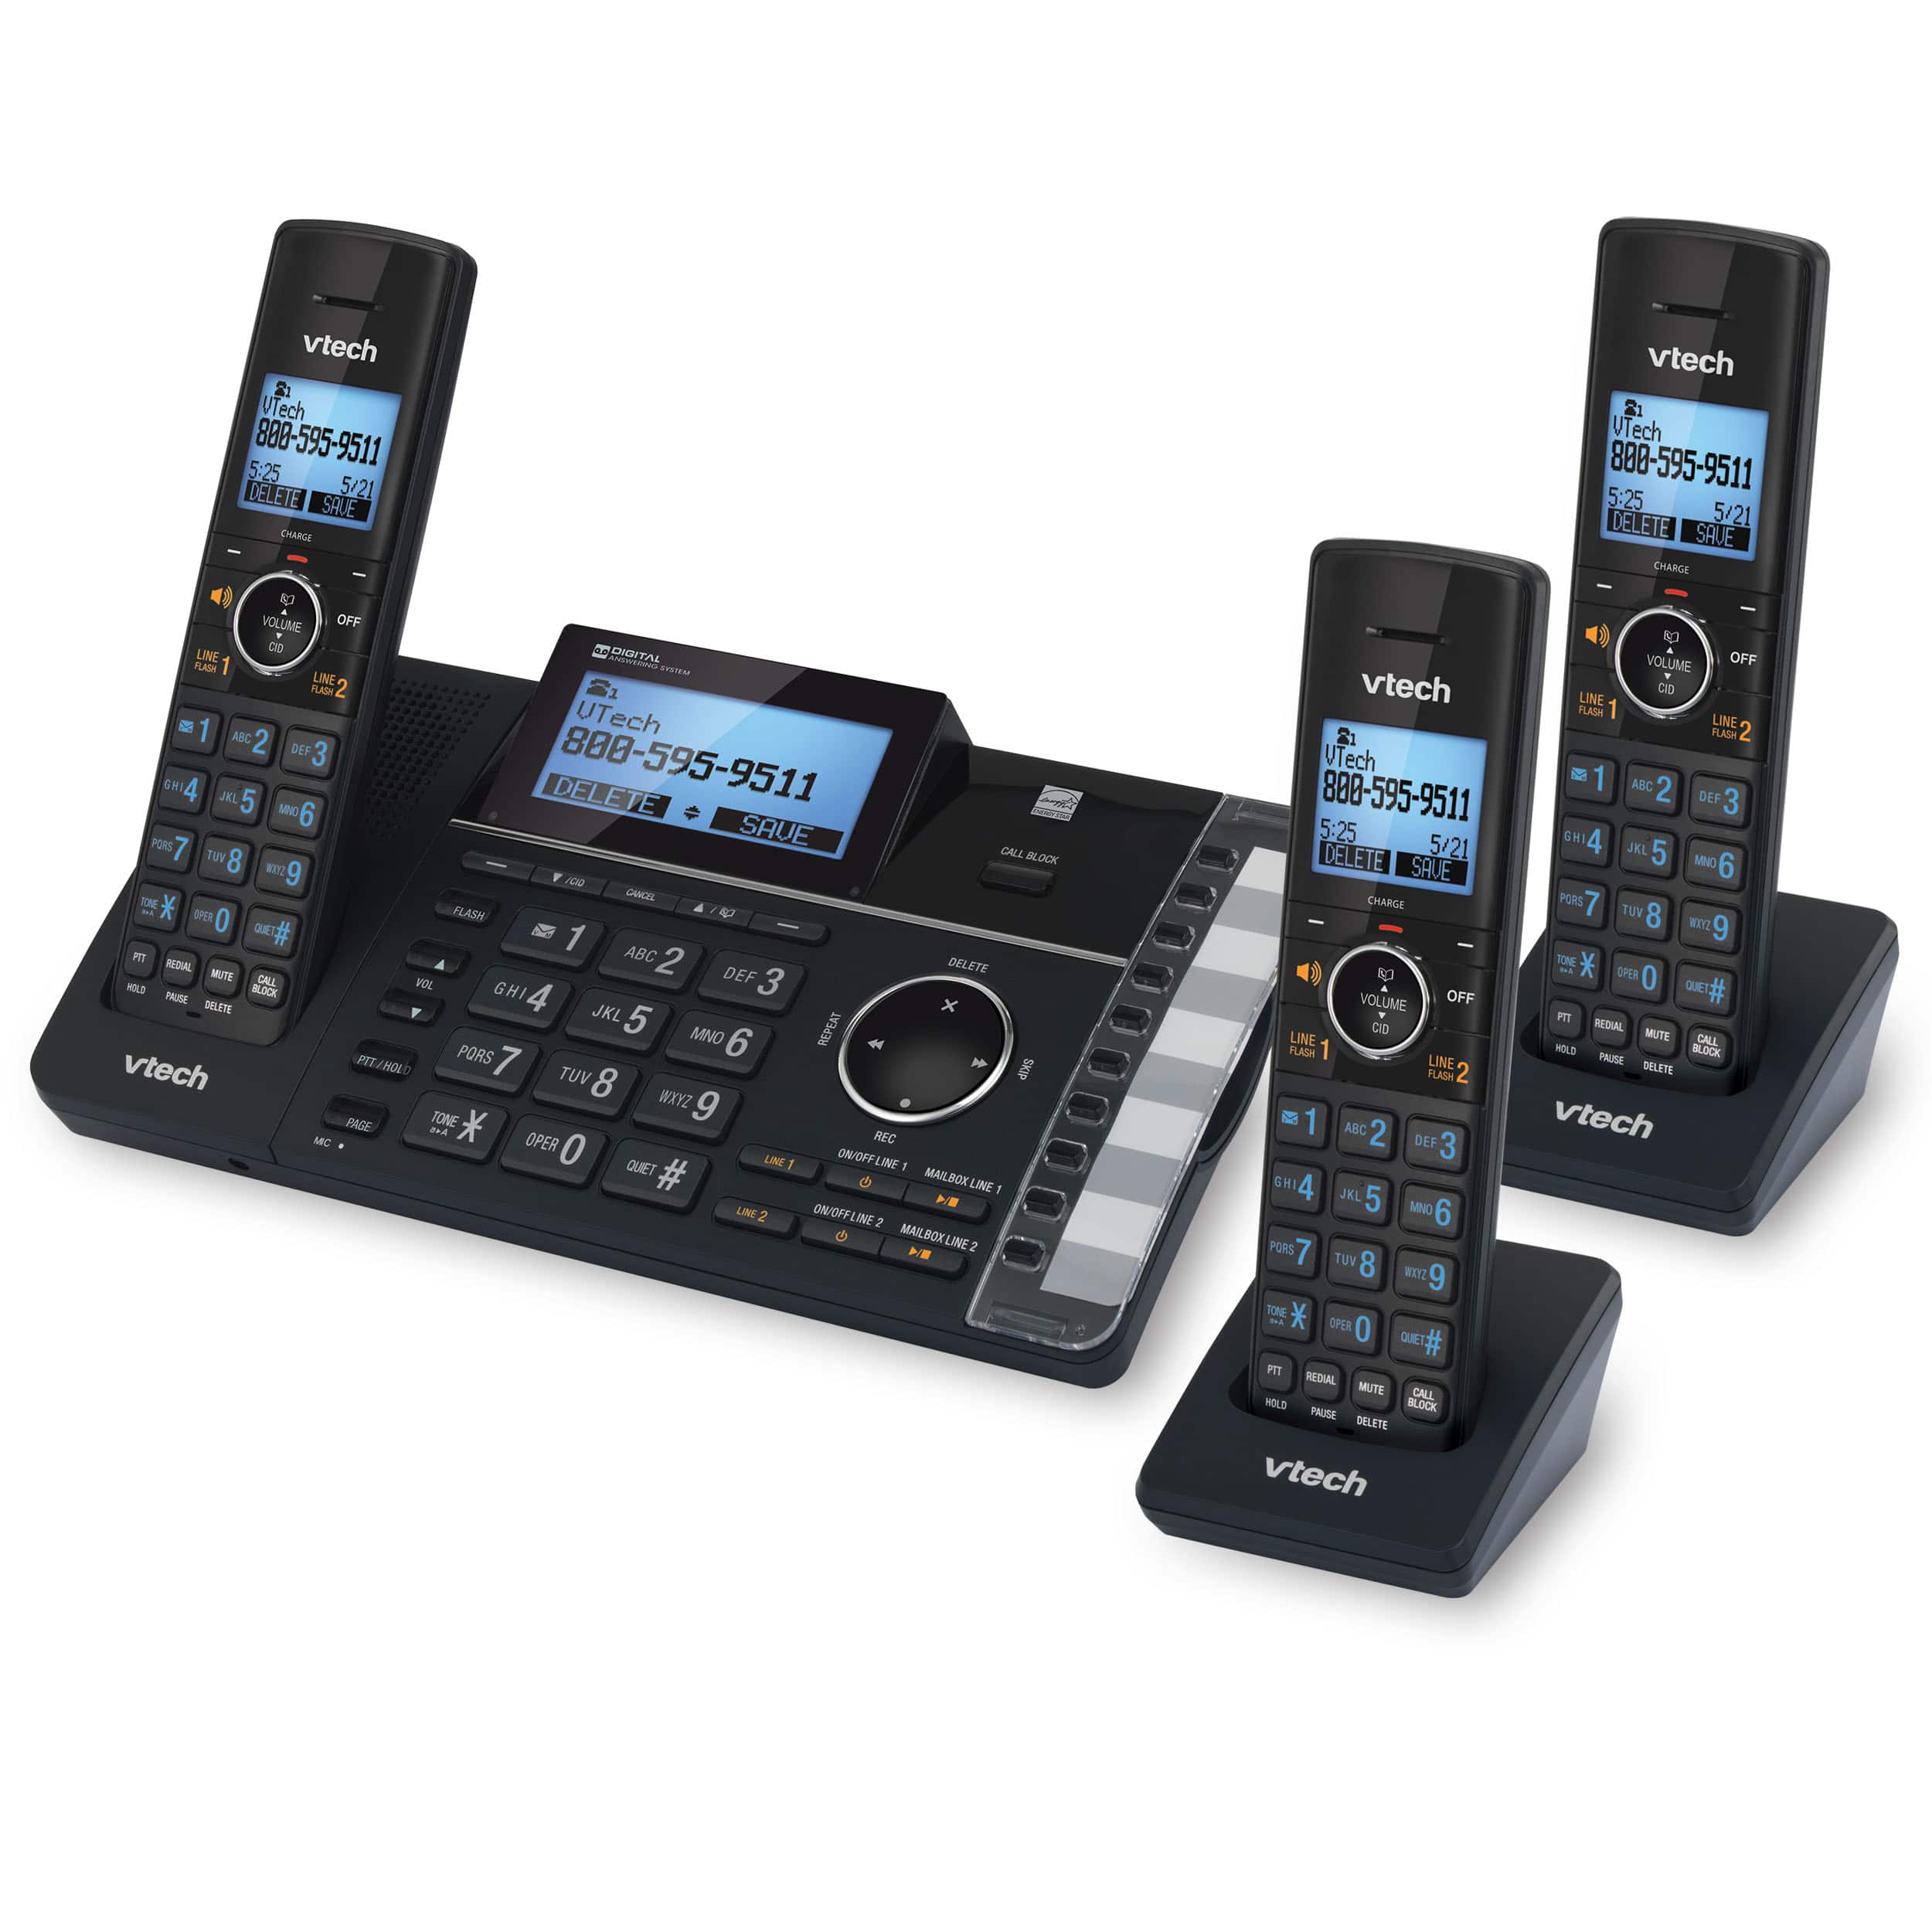 3 Handset 2-Line Cordless Answering System with Smart Call Blocker - view 2